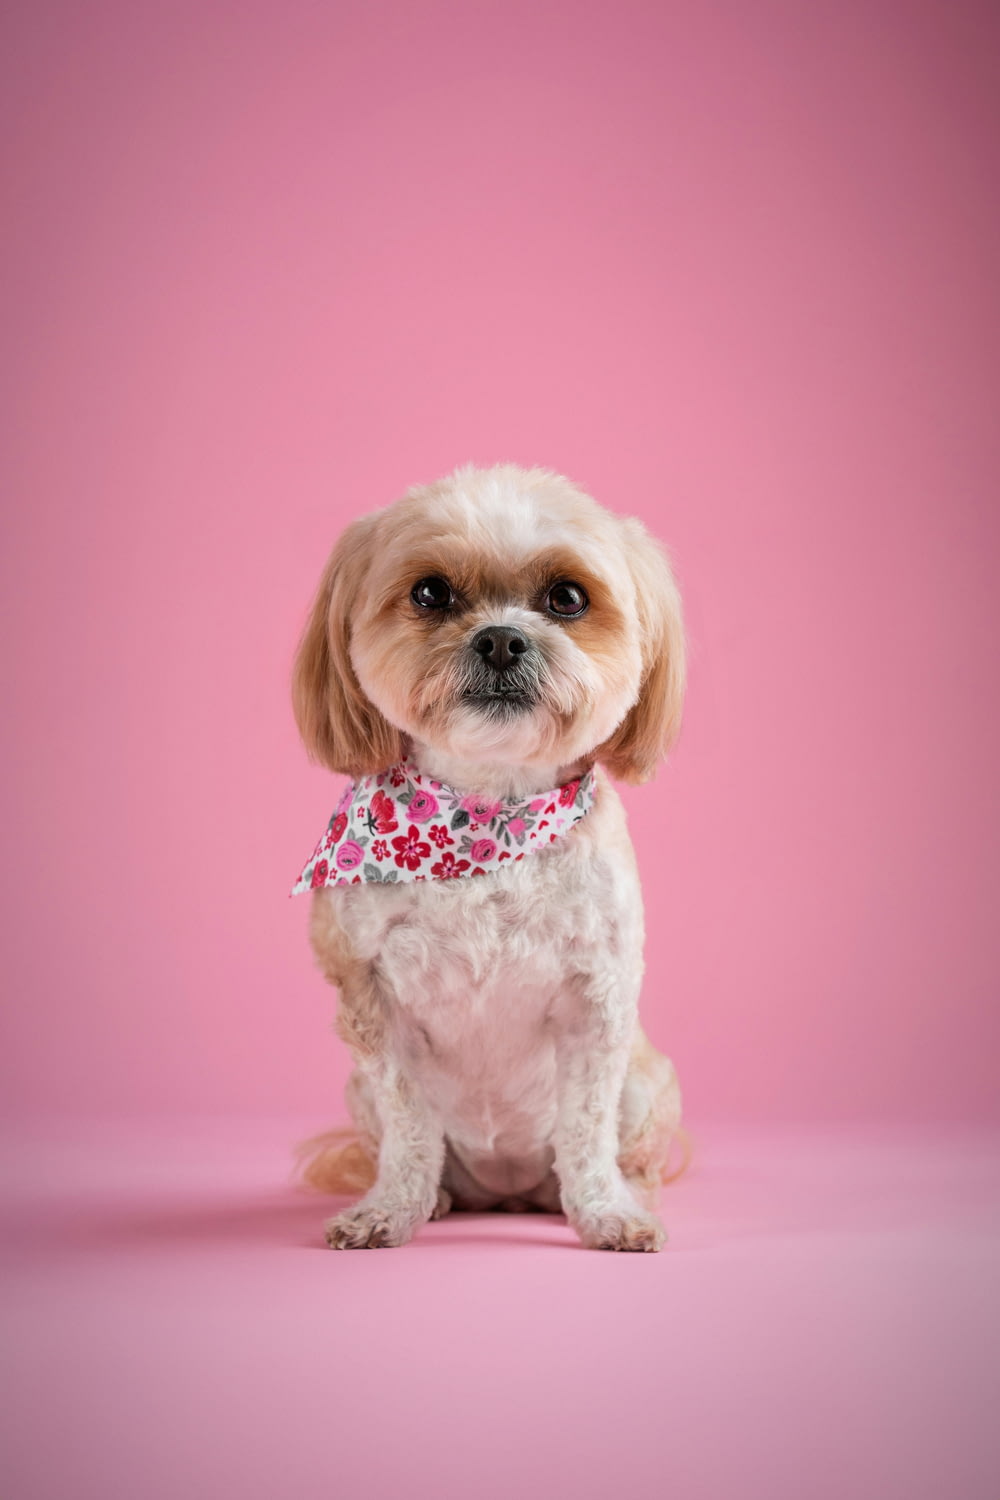 a small white dog sitting on a pink background